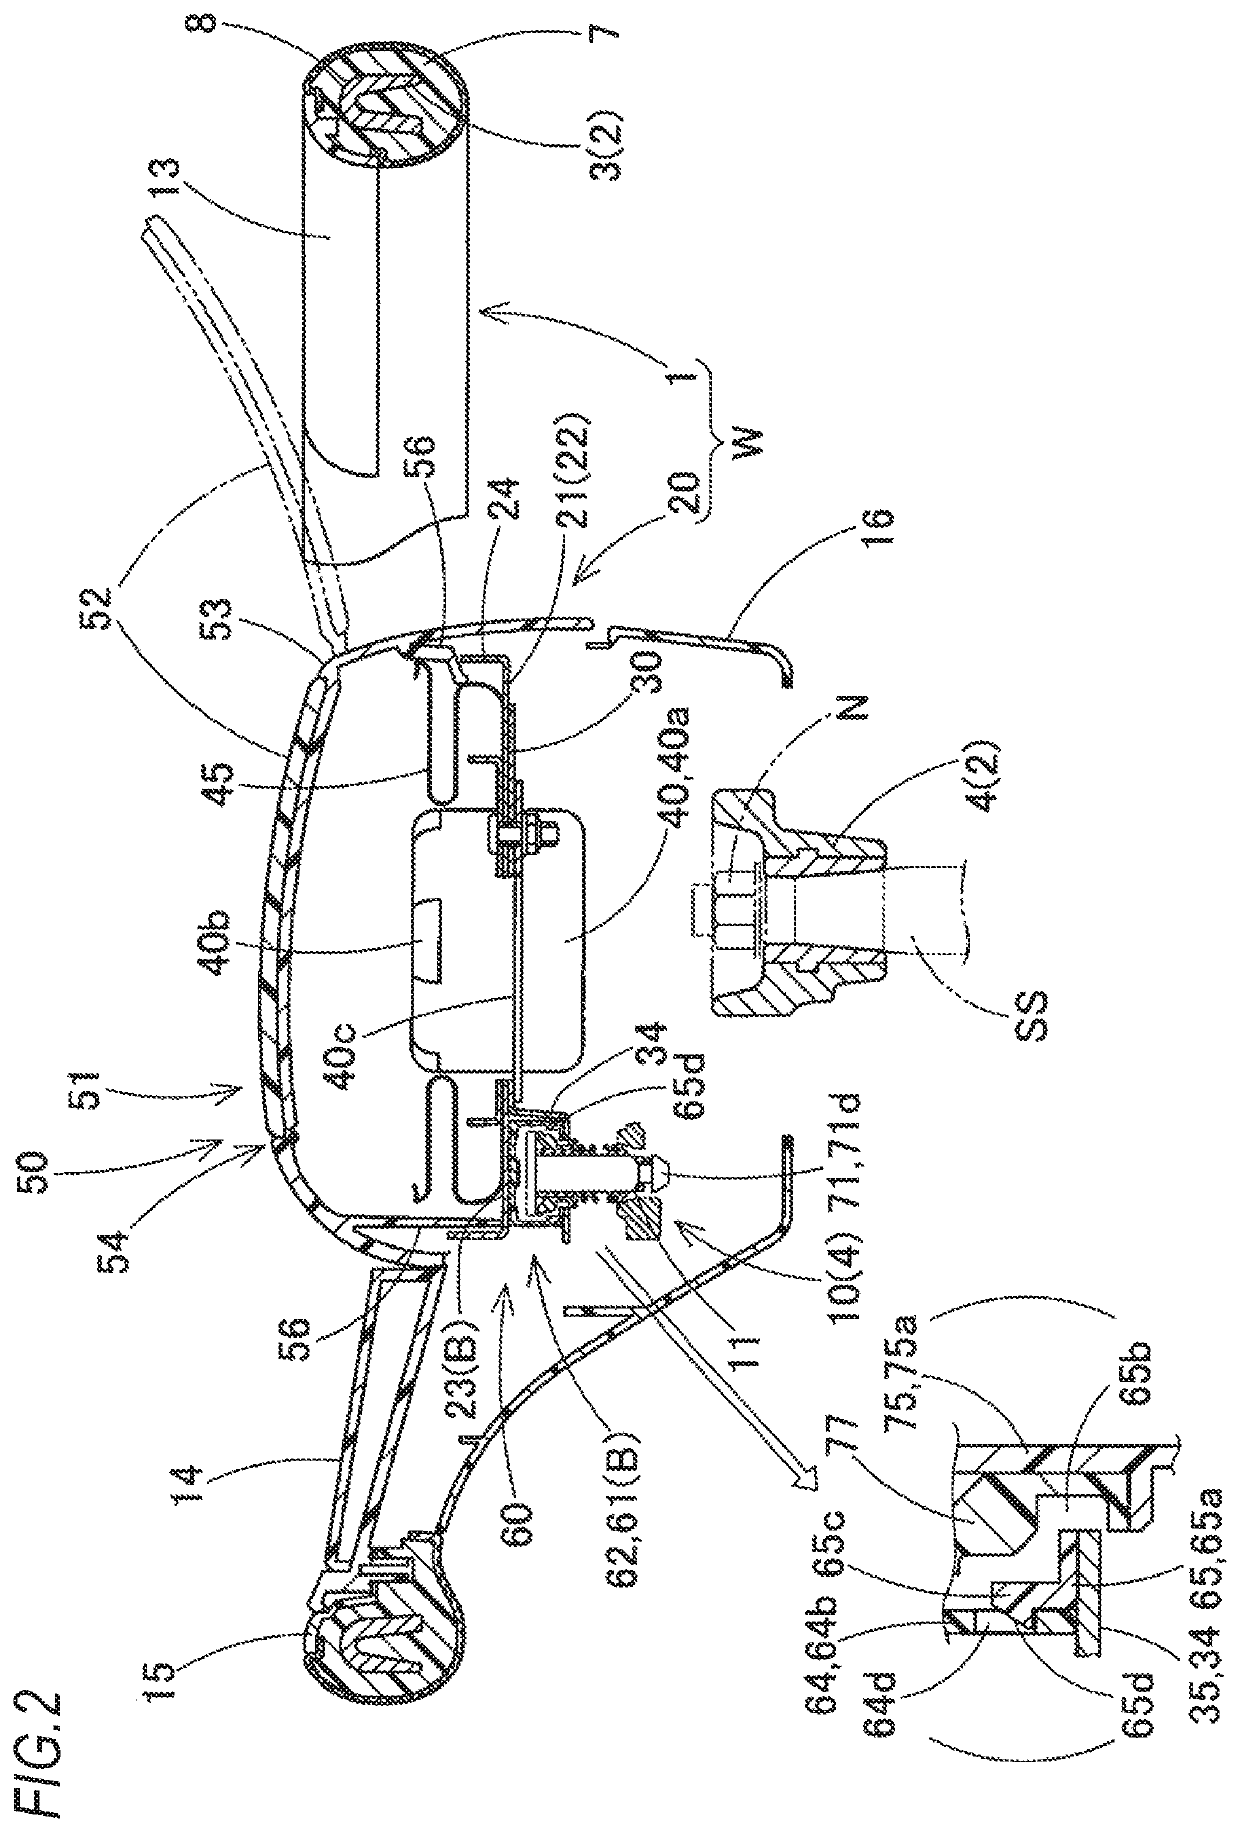 Airbag device with horn switch body